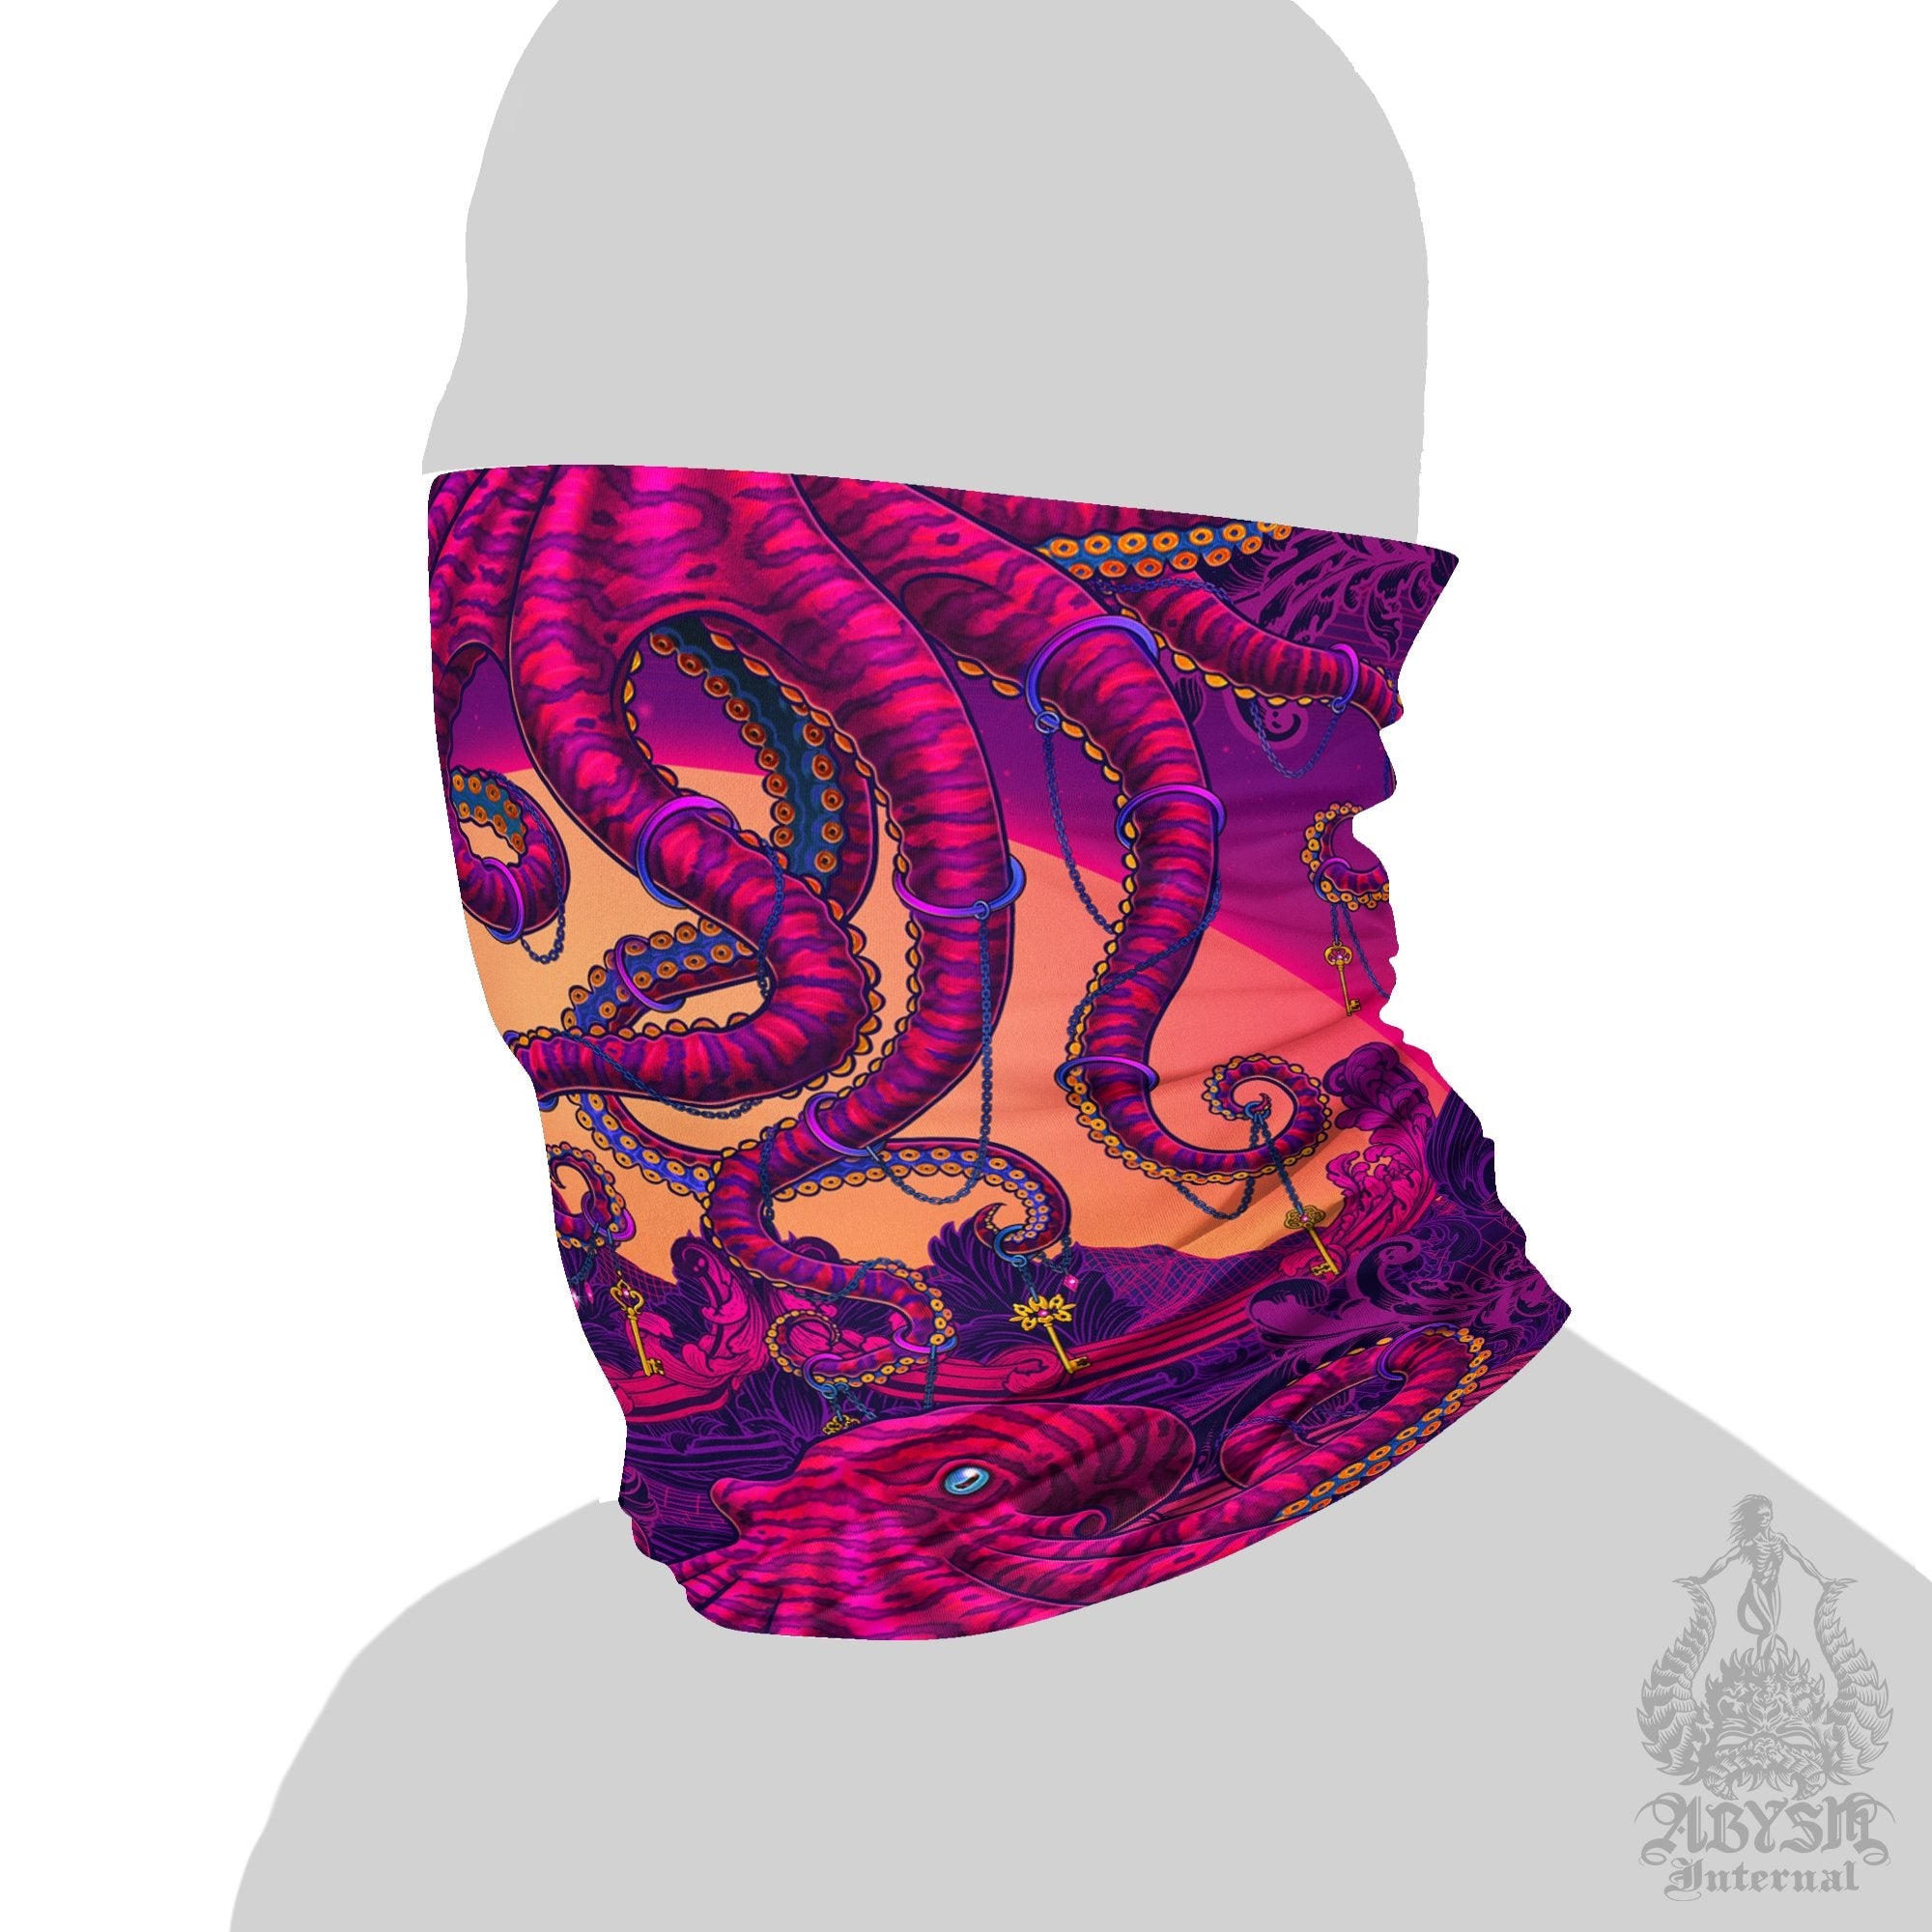 Psychedelic Neck Gaiter, Face Mask, Synthwave Head Covering, Vaporwave, 80s Retrowave, Rave Festival Outfit - Octopus - Abysm Internal